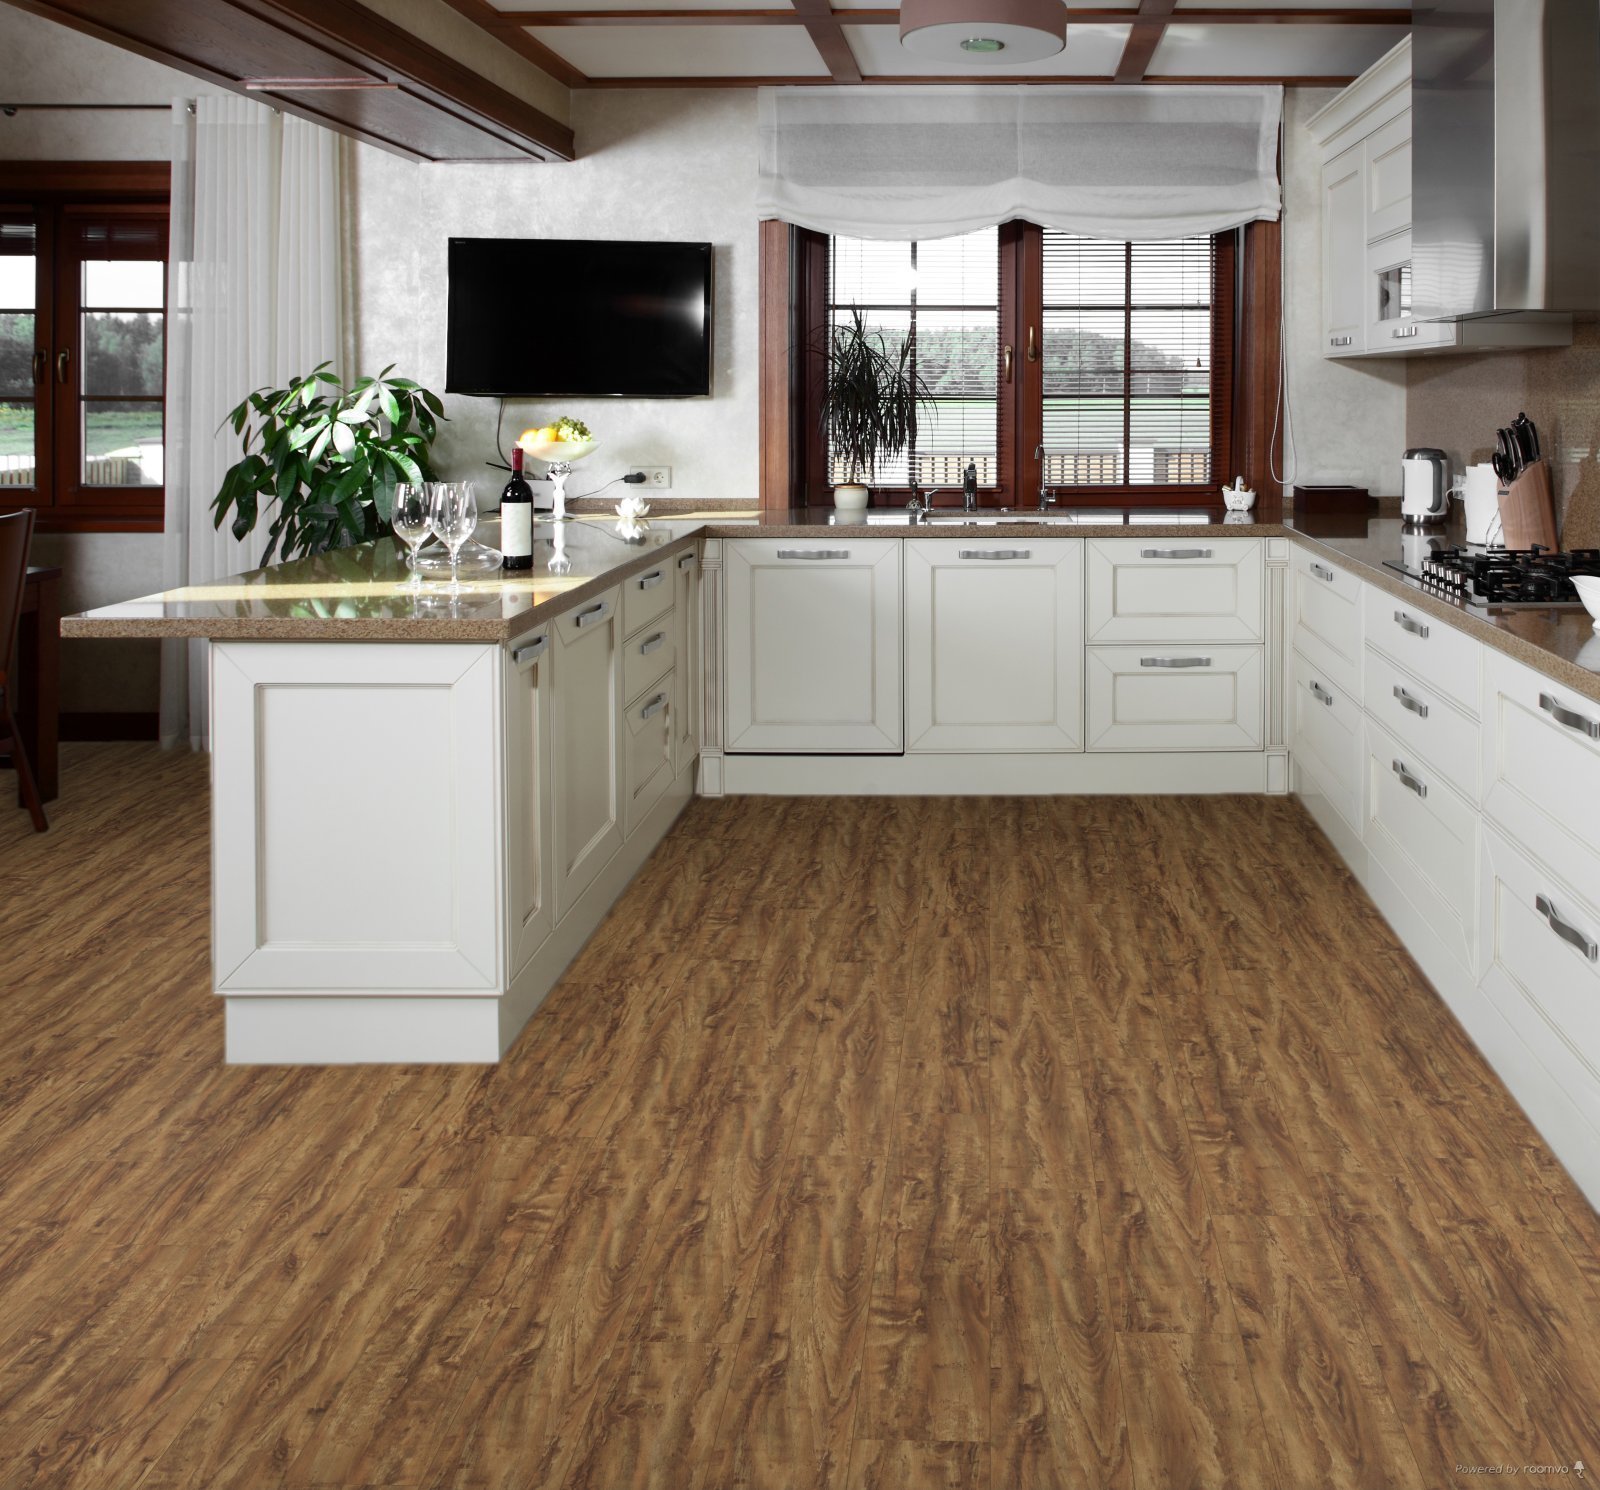 Horizen Flooring presents to you a picture of a quality wide plank Hickory luxury vinyl plank. NovoCore Premium EIR collection features a wide range of colors & designs that will compliment any interior. Natural wood grain synchronized surface allow for an authentic hardwood look & feel. This collection features a 0.25″ / 6.5 mm overall thickness and a durable 22 mil / 0.55 mm wear layer for residential and commercial applications.